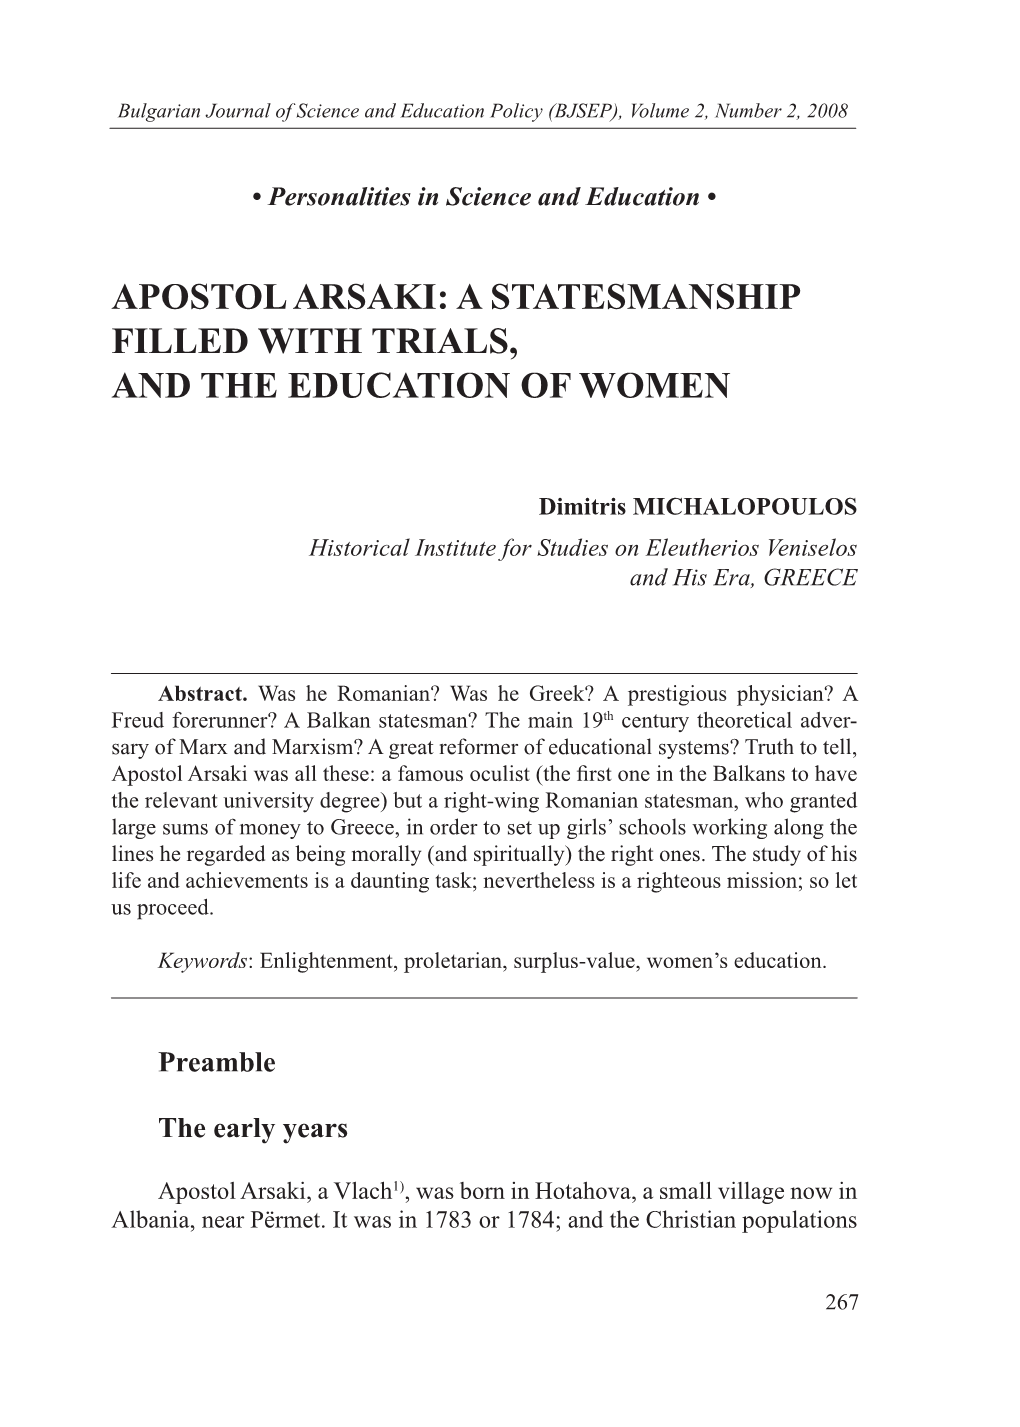 Apostol Arsaki: a Statesmanship Filled with Trials, and the Education of Women